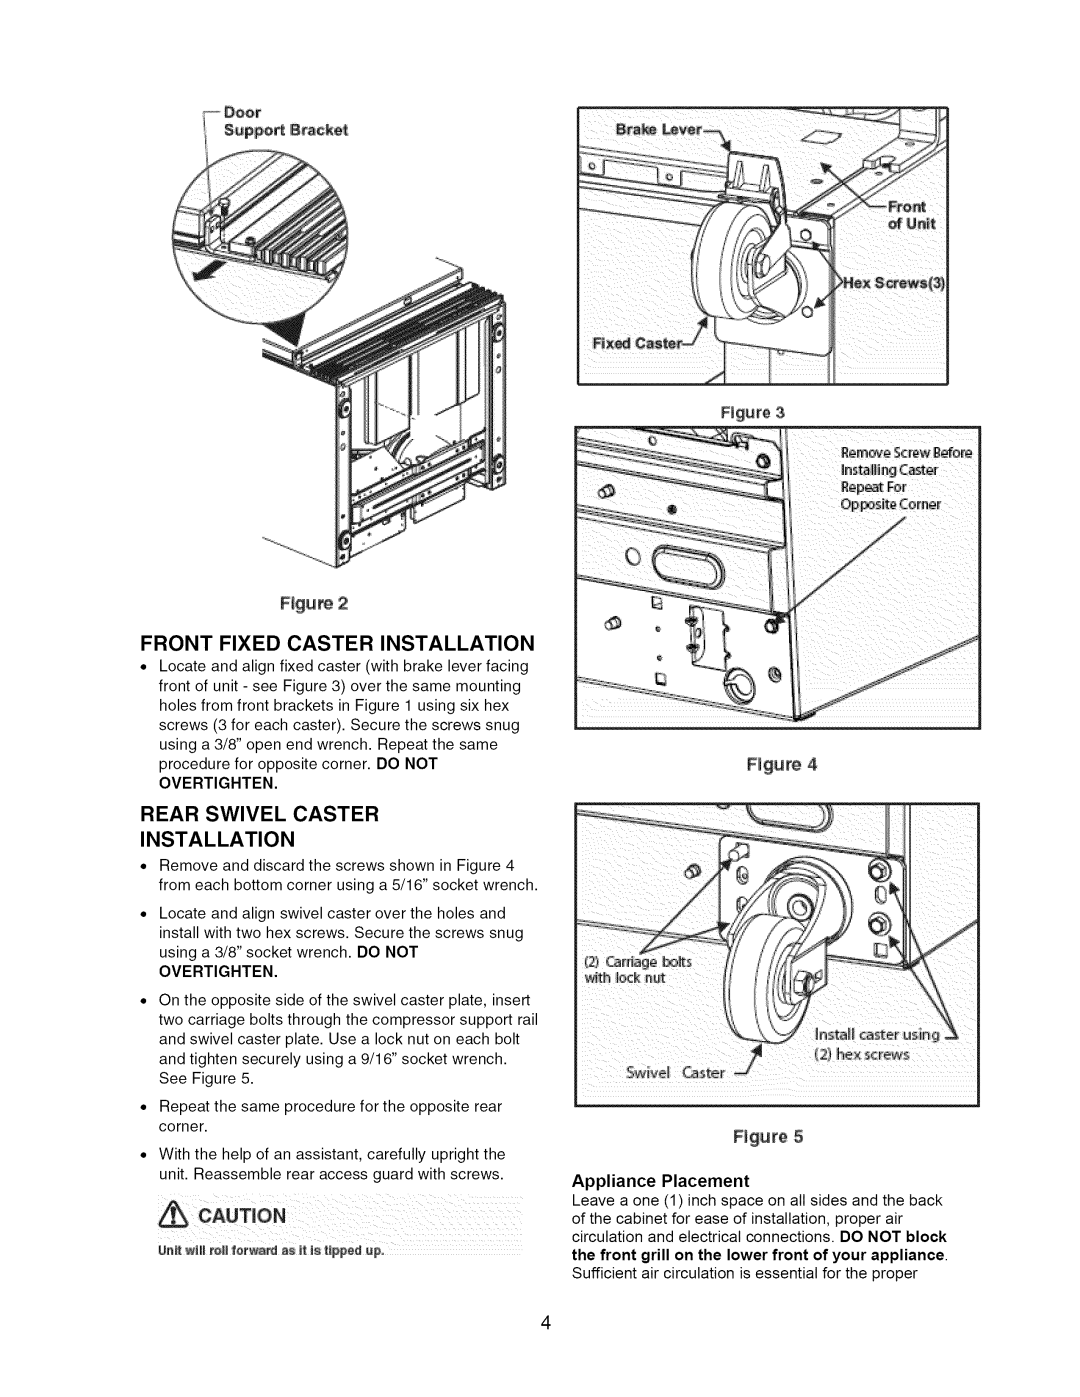 Arctic Air 297283501 Front Fixed Caster Installation, Rear Swivel Caster Installation, F_gu_, Figure, Appliance Placement 